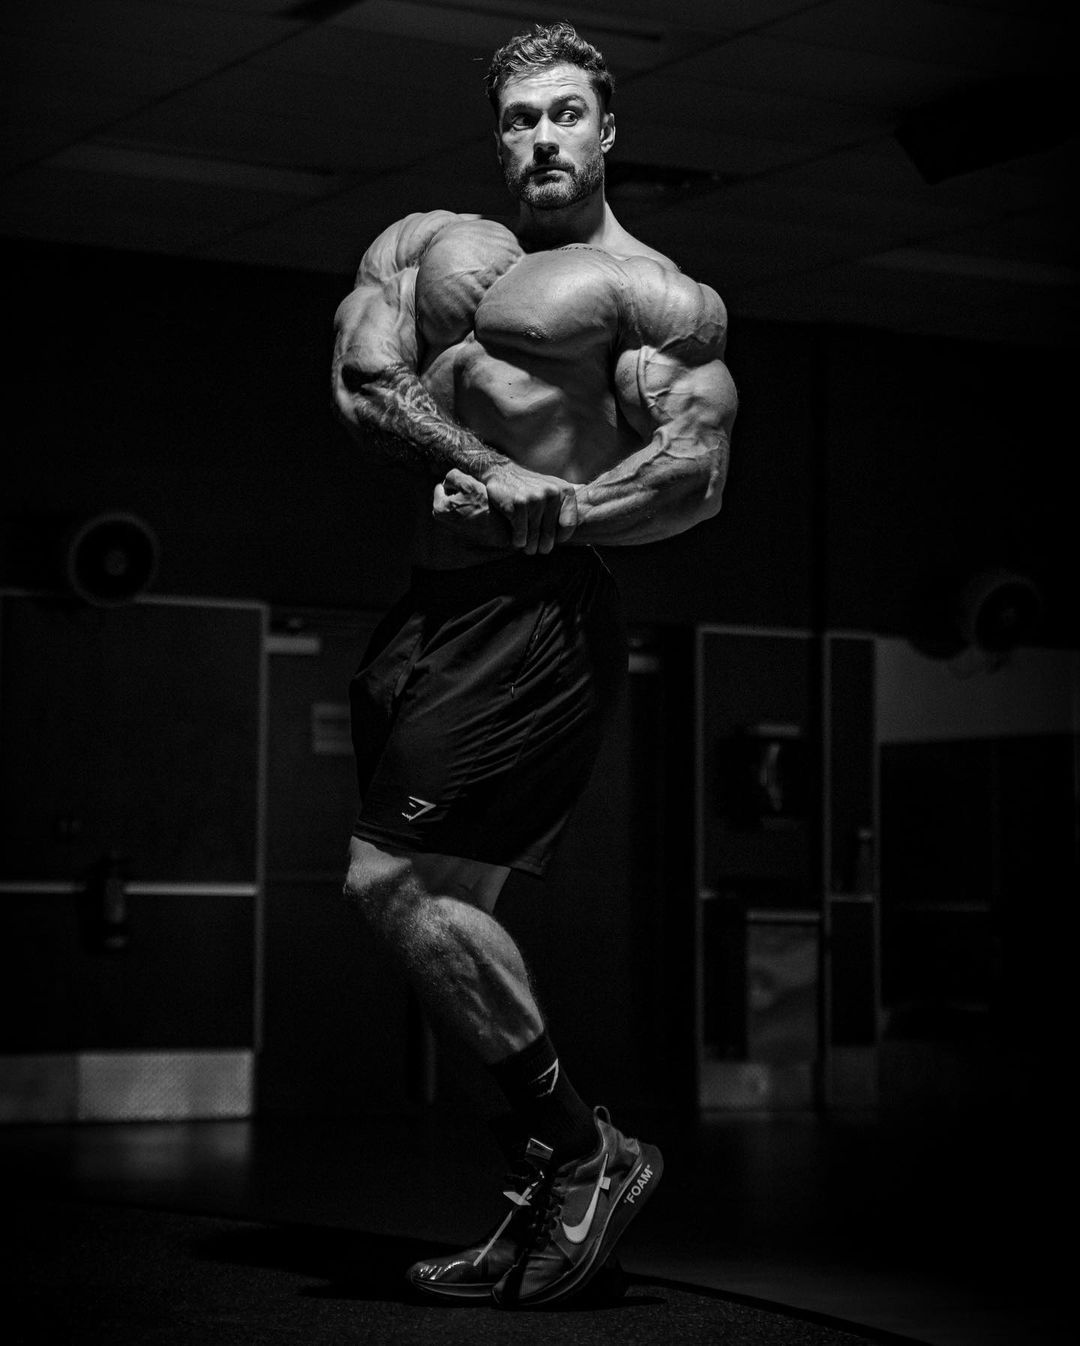 Chris Bumstead on Instagram: “Something special is coming